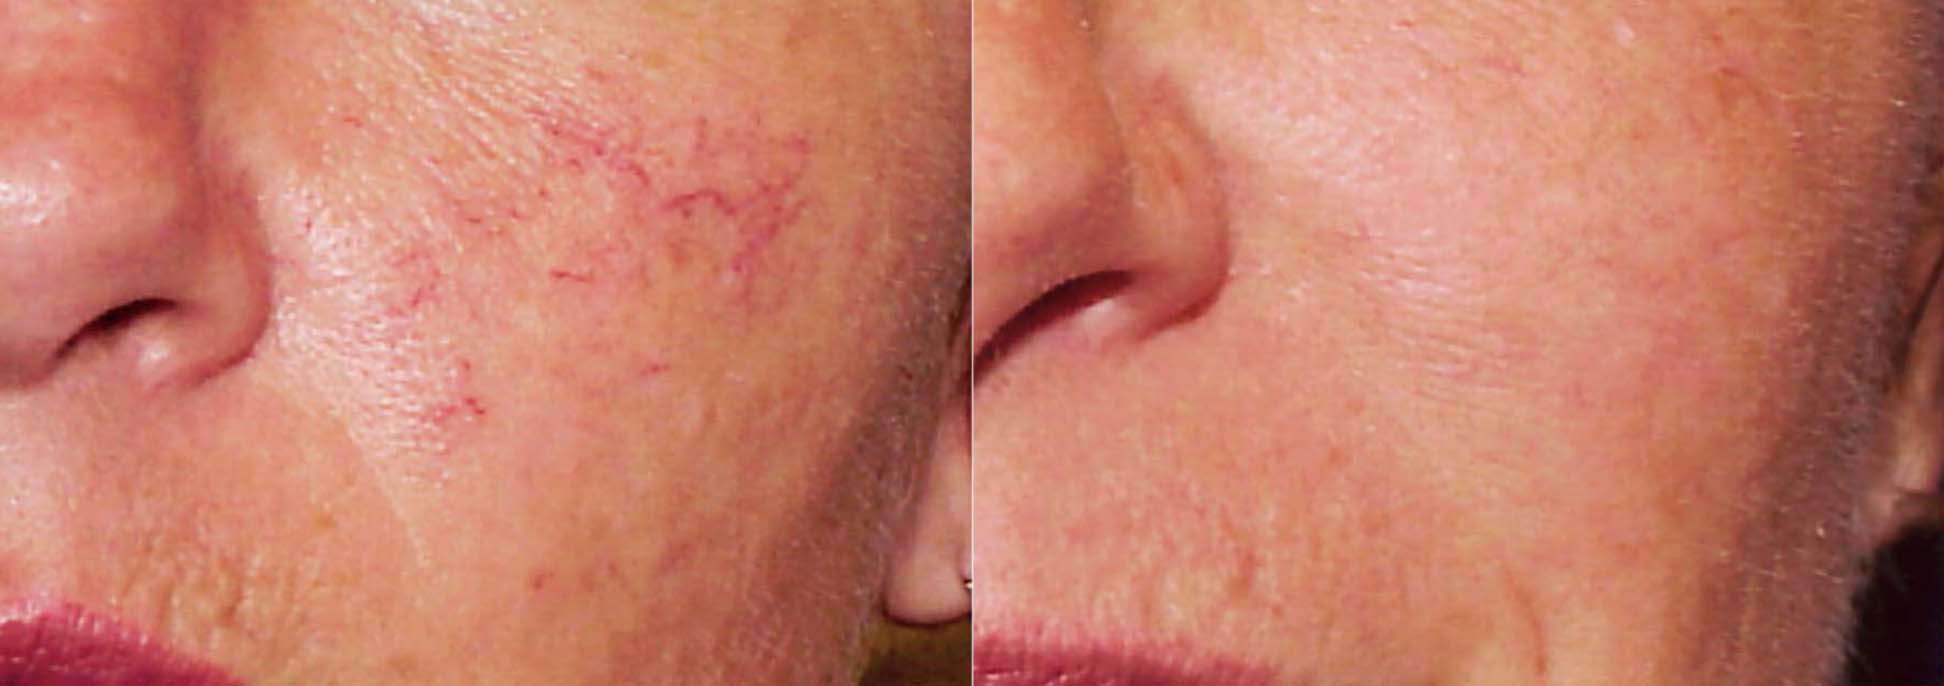 Rosacea - before and after treatment, patient face, cheek